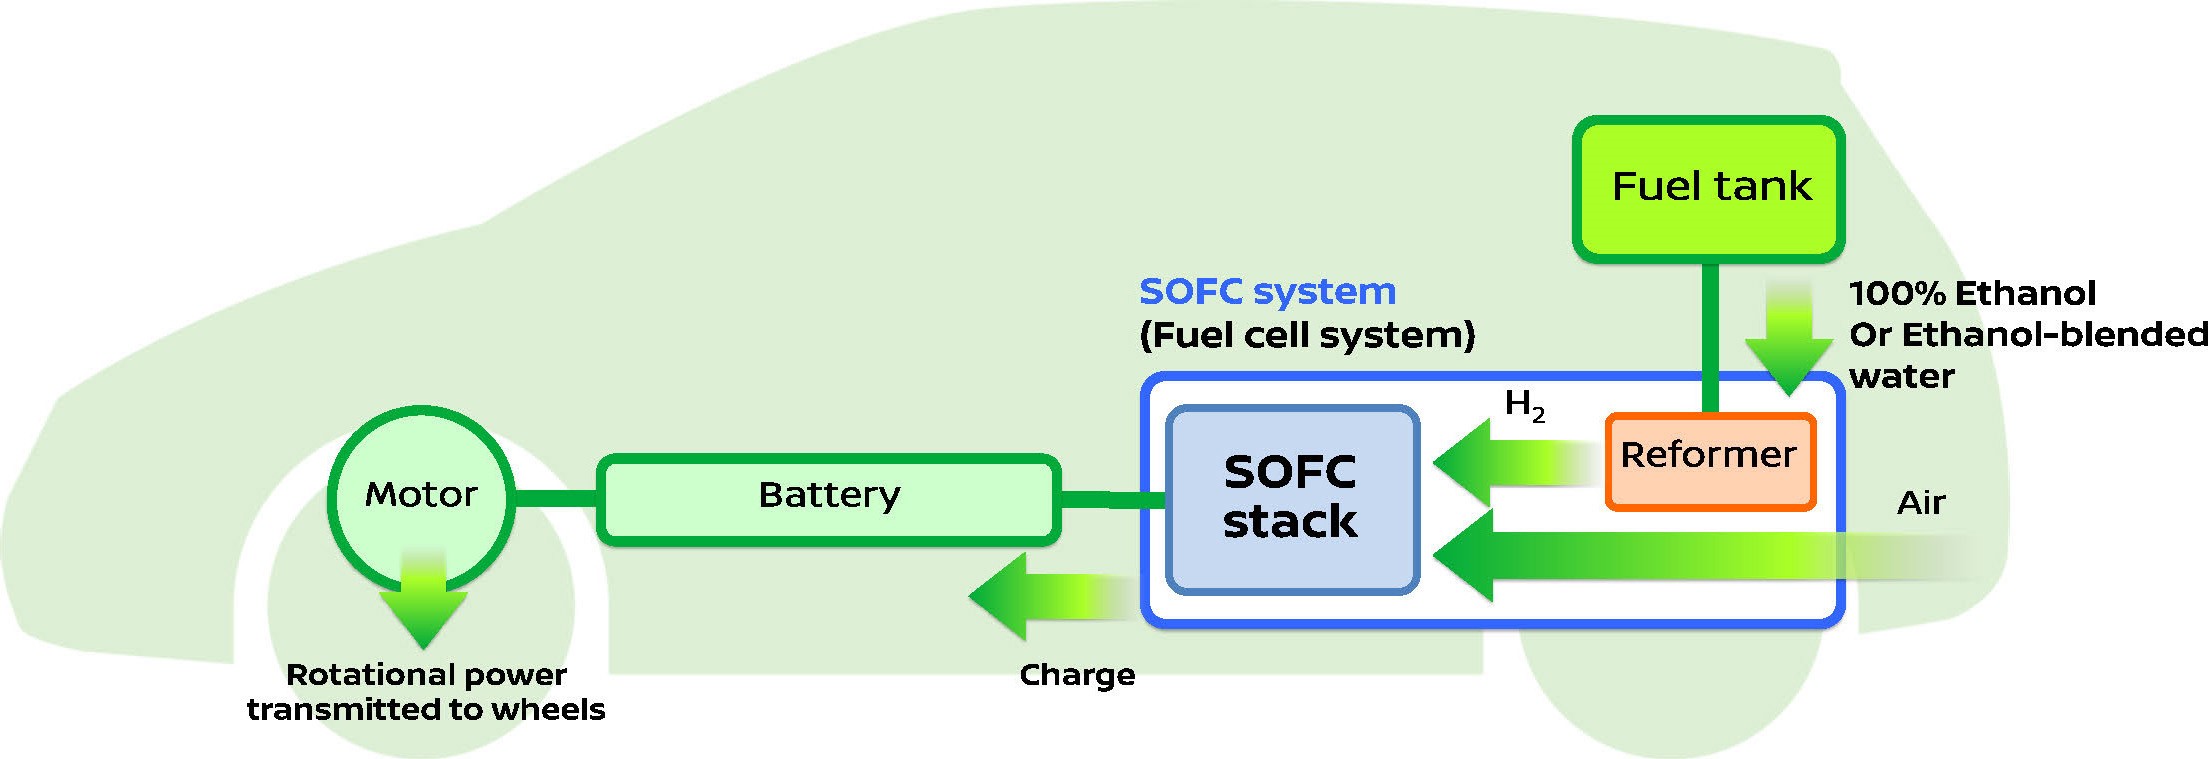 SOFC (Solide Oxyde Fuel-Cell)